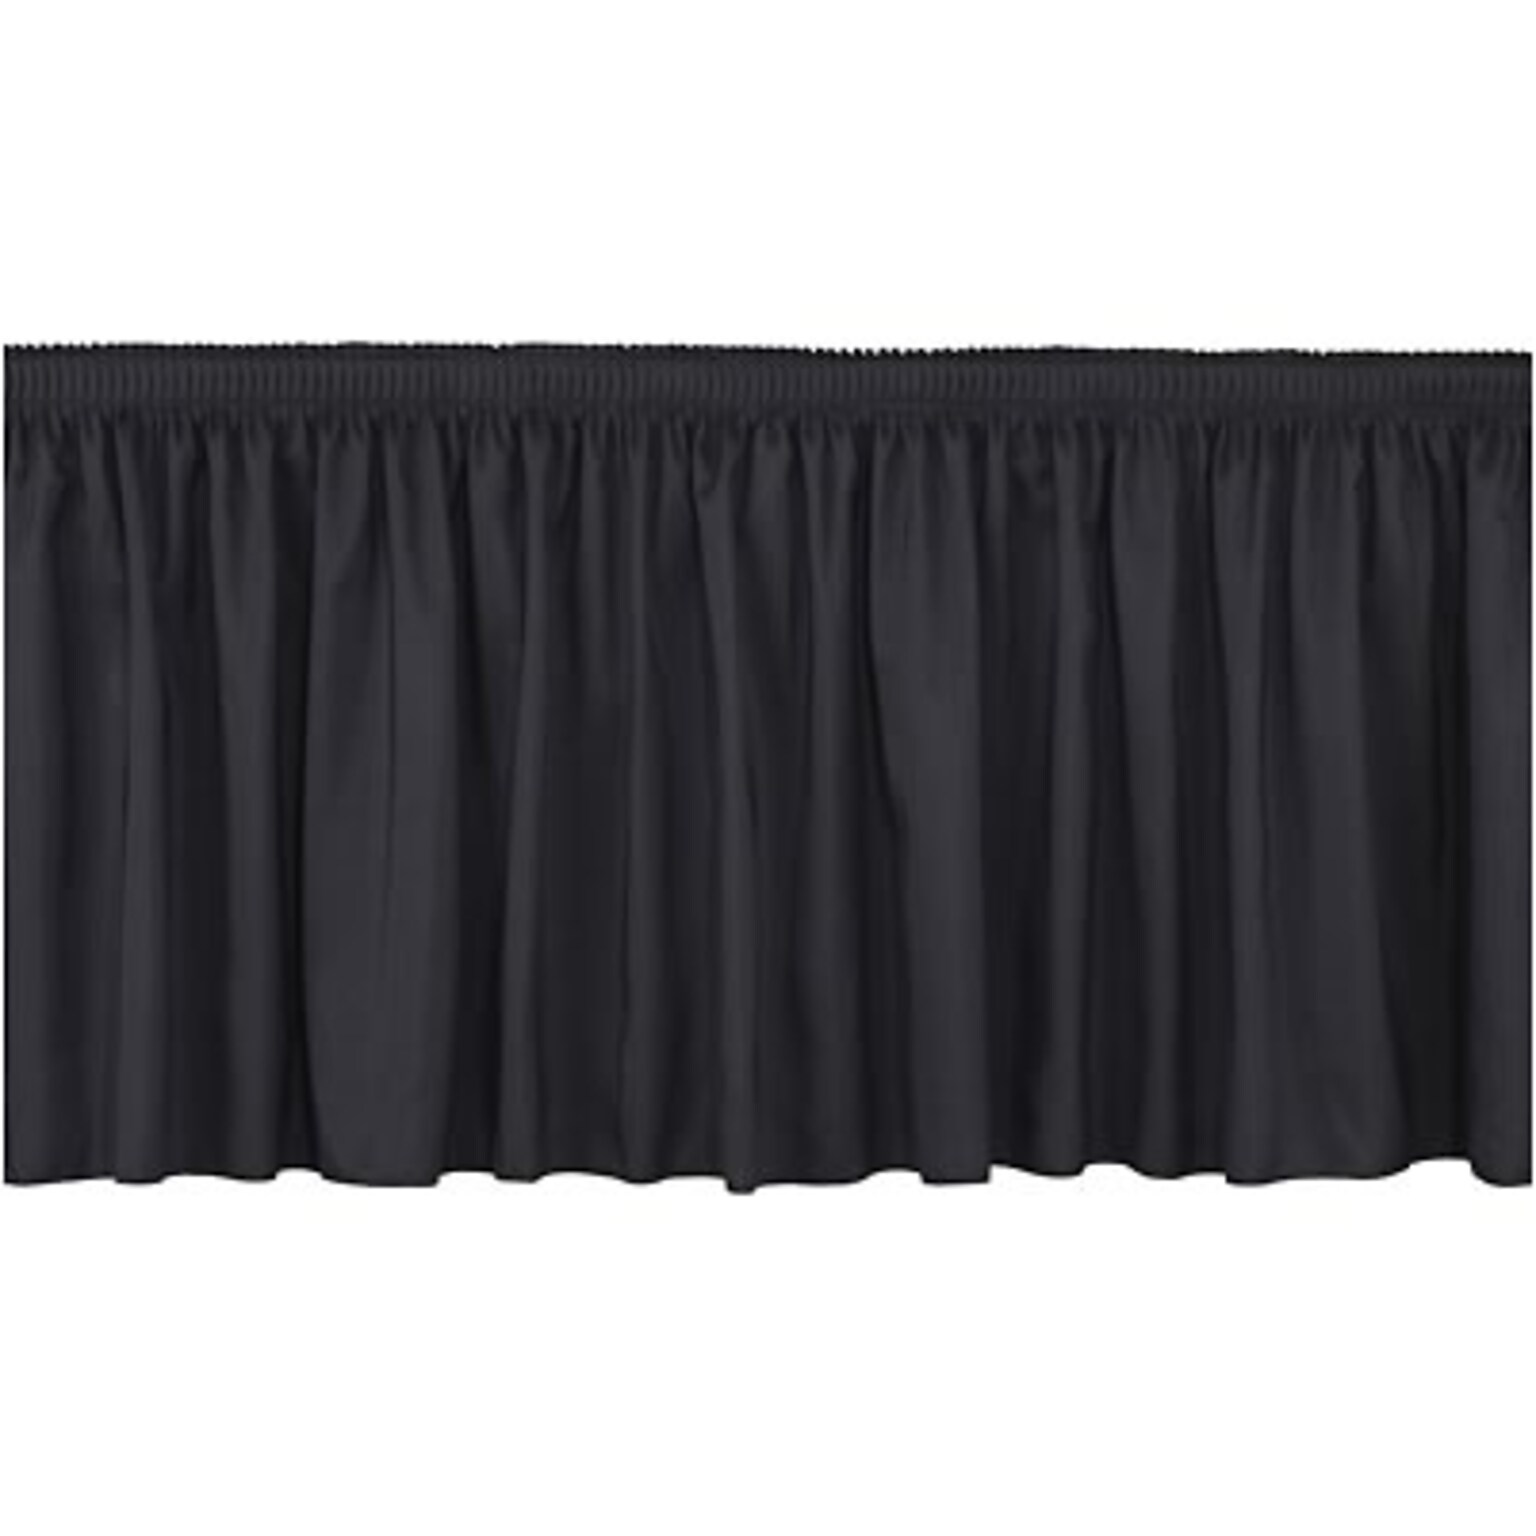 NPS® 16H x  48L Stage Shirred Pleat Skirting, Black (SS164810)